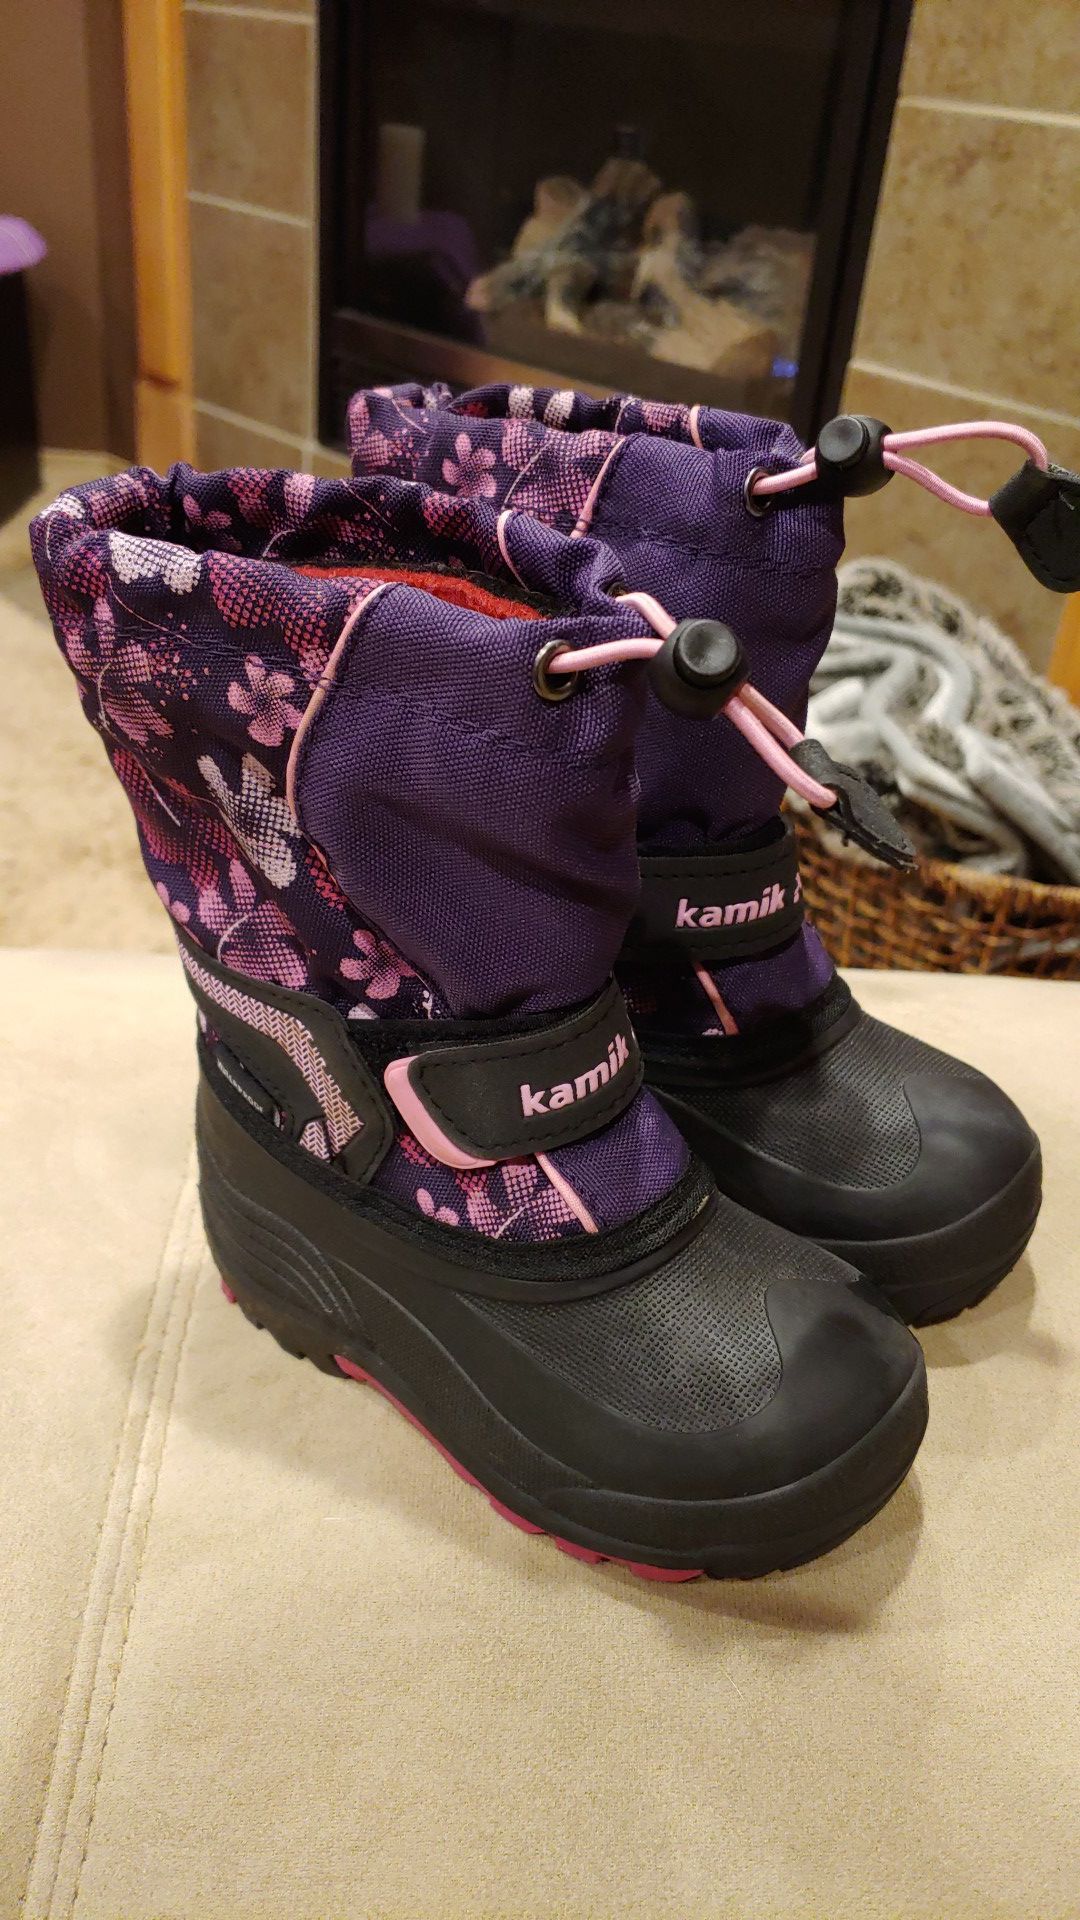 Kamik kids insulated waterproof snow boots size 9